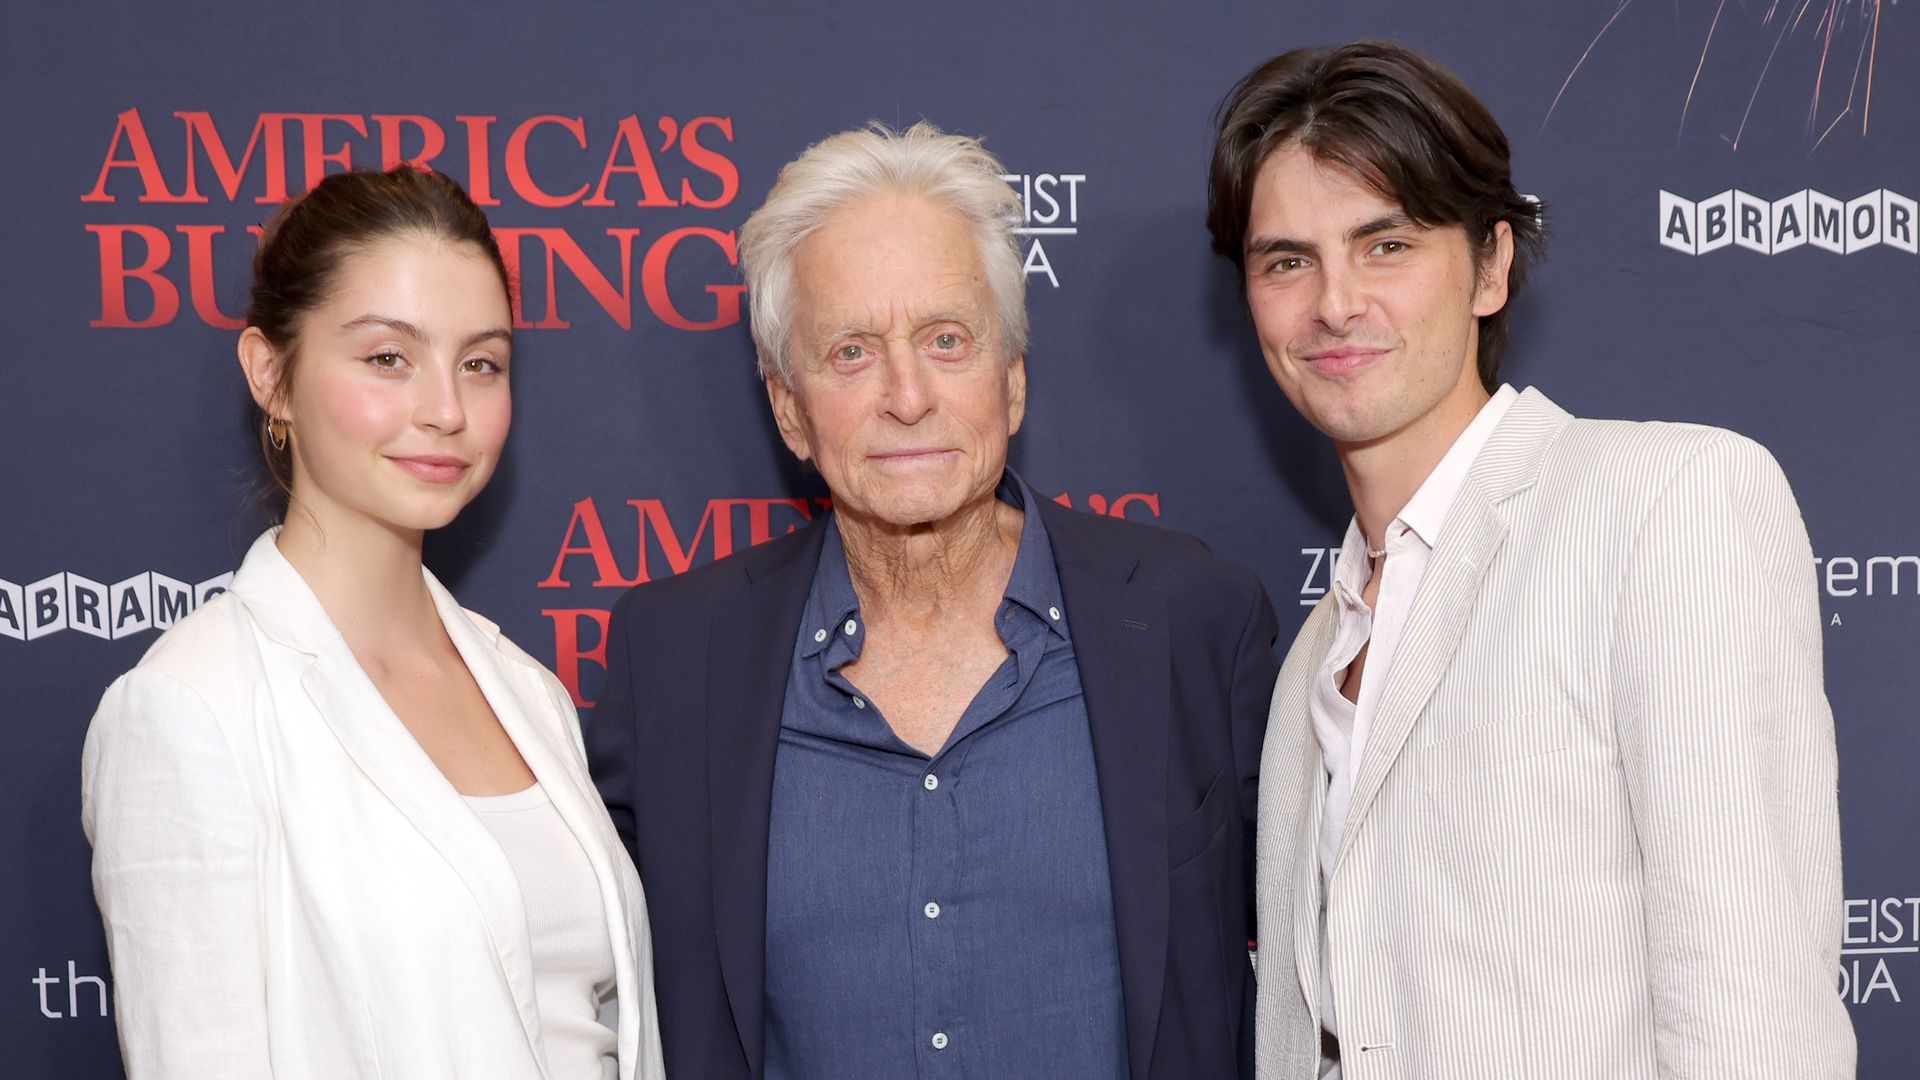 Catherine Zeta-Jones and Michael Douglas' kids Dylan and Carys are ready to continue the family legacy